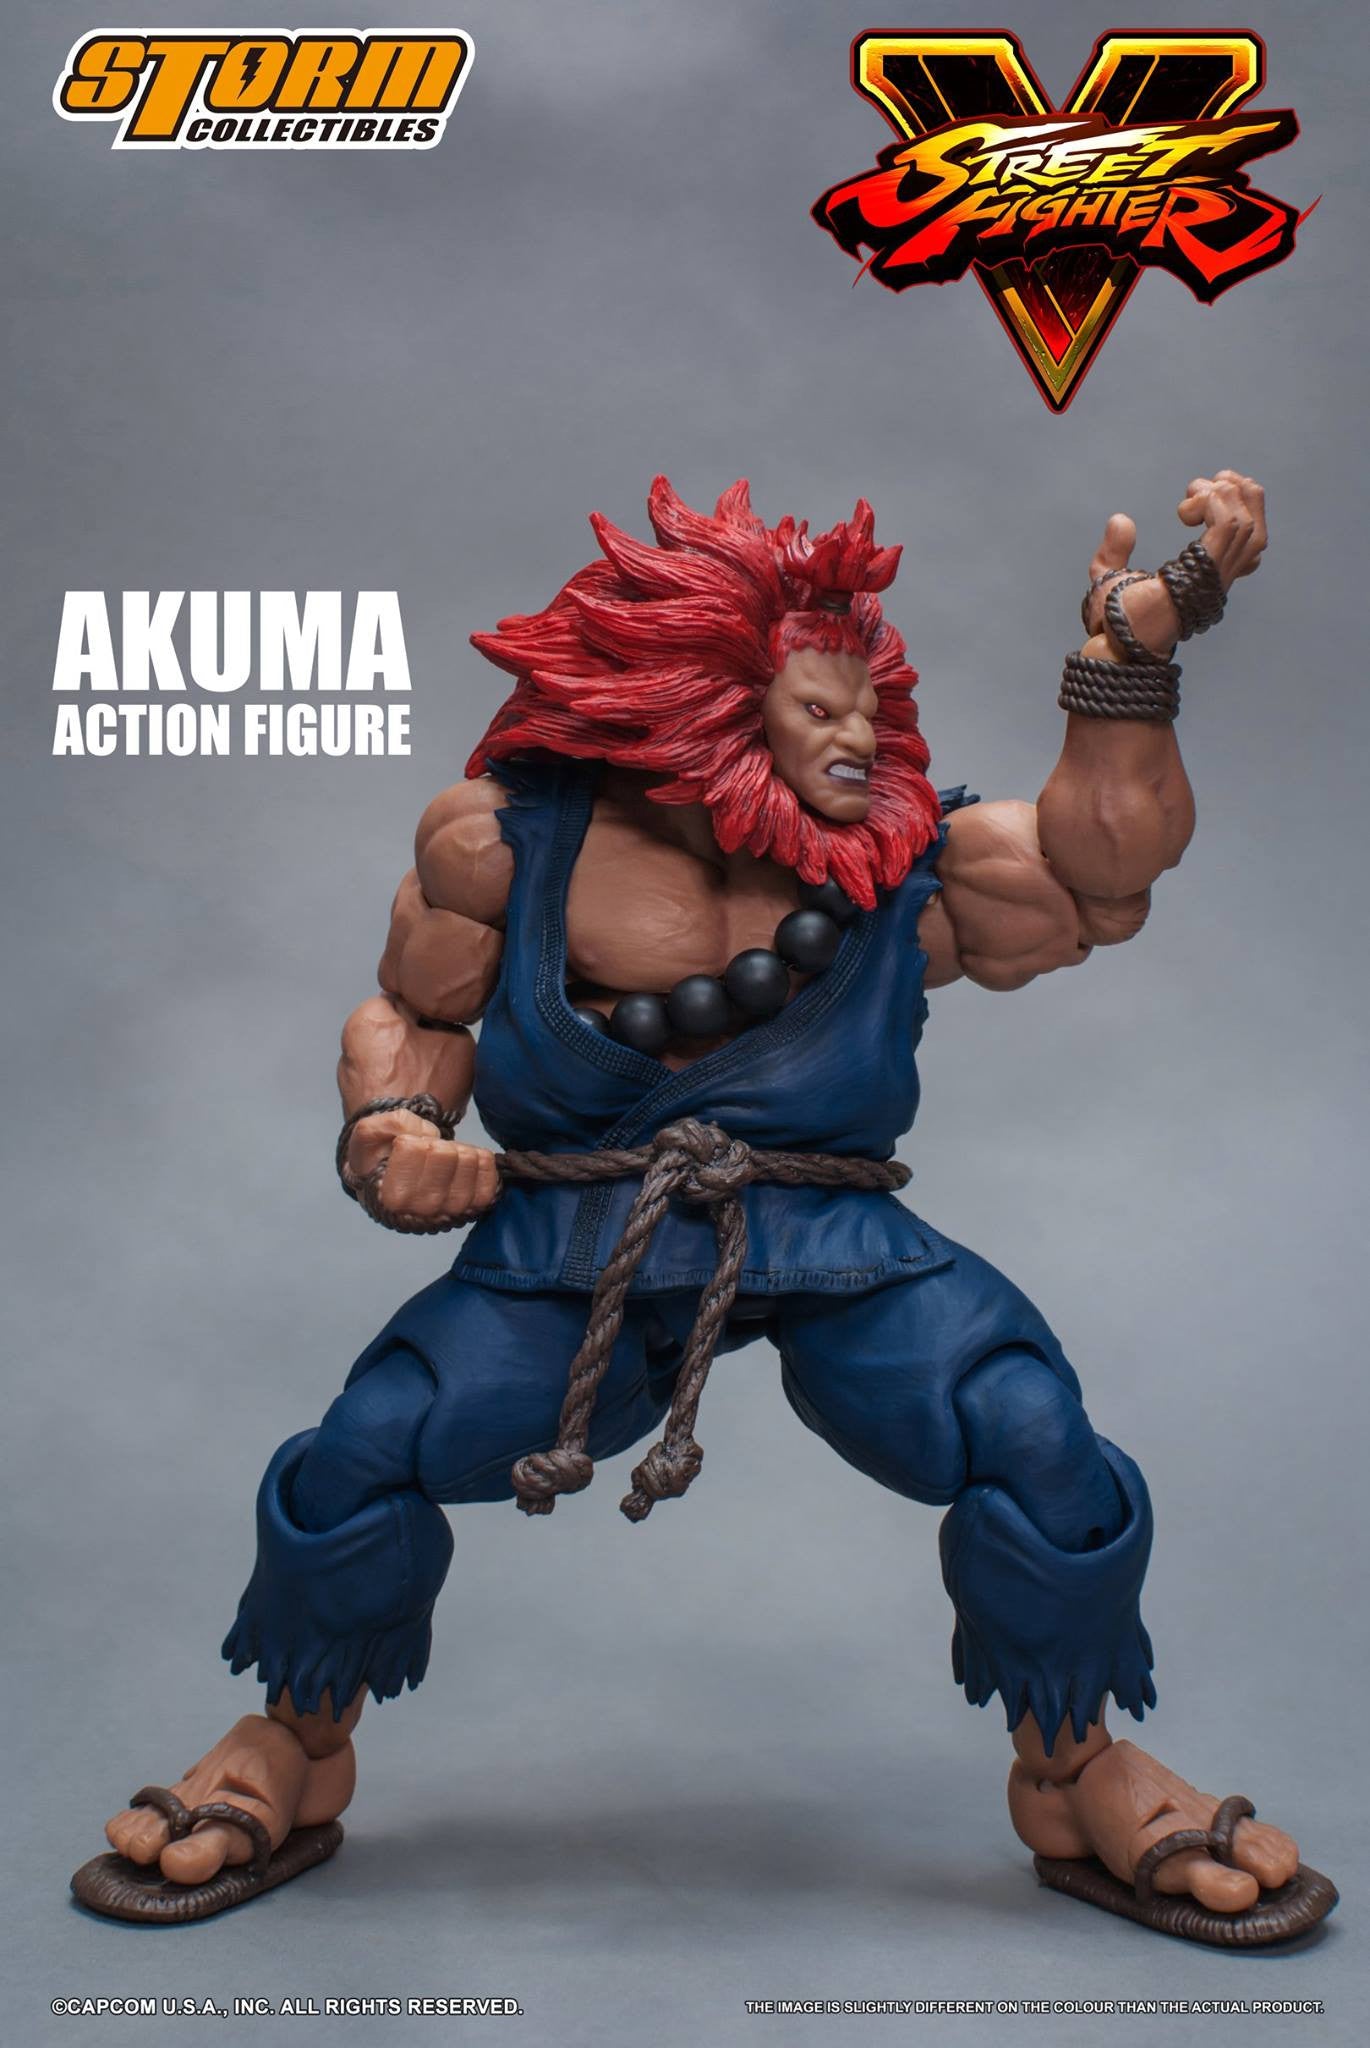 Storm Collectibles - 1:12 Scale Action Figure - Street Fighter V - Akuma - Marvelous Toys